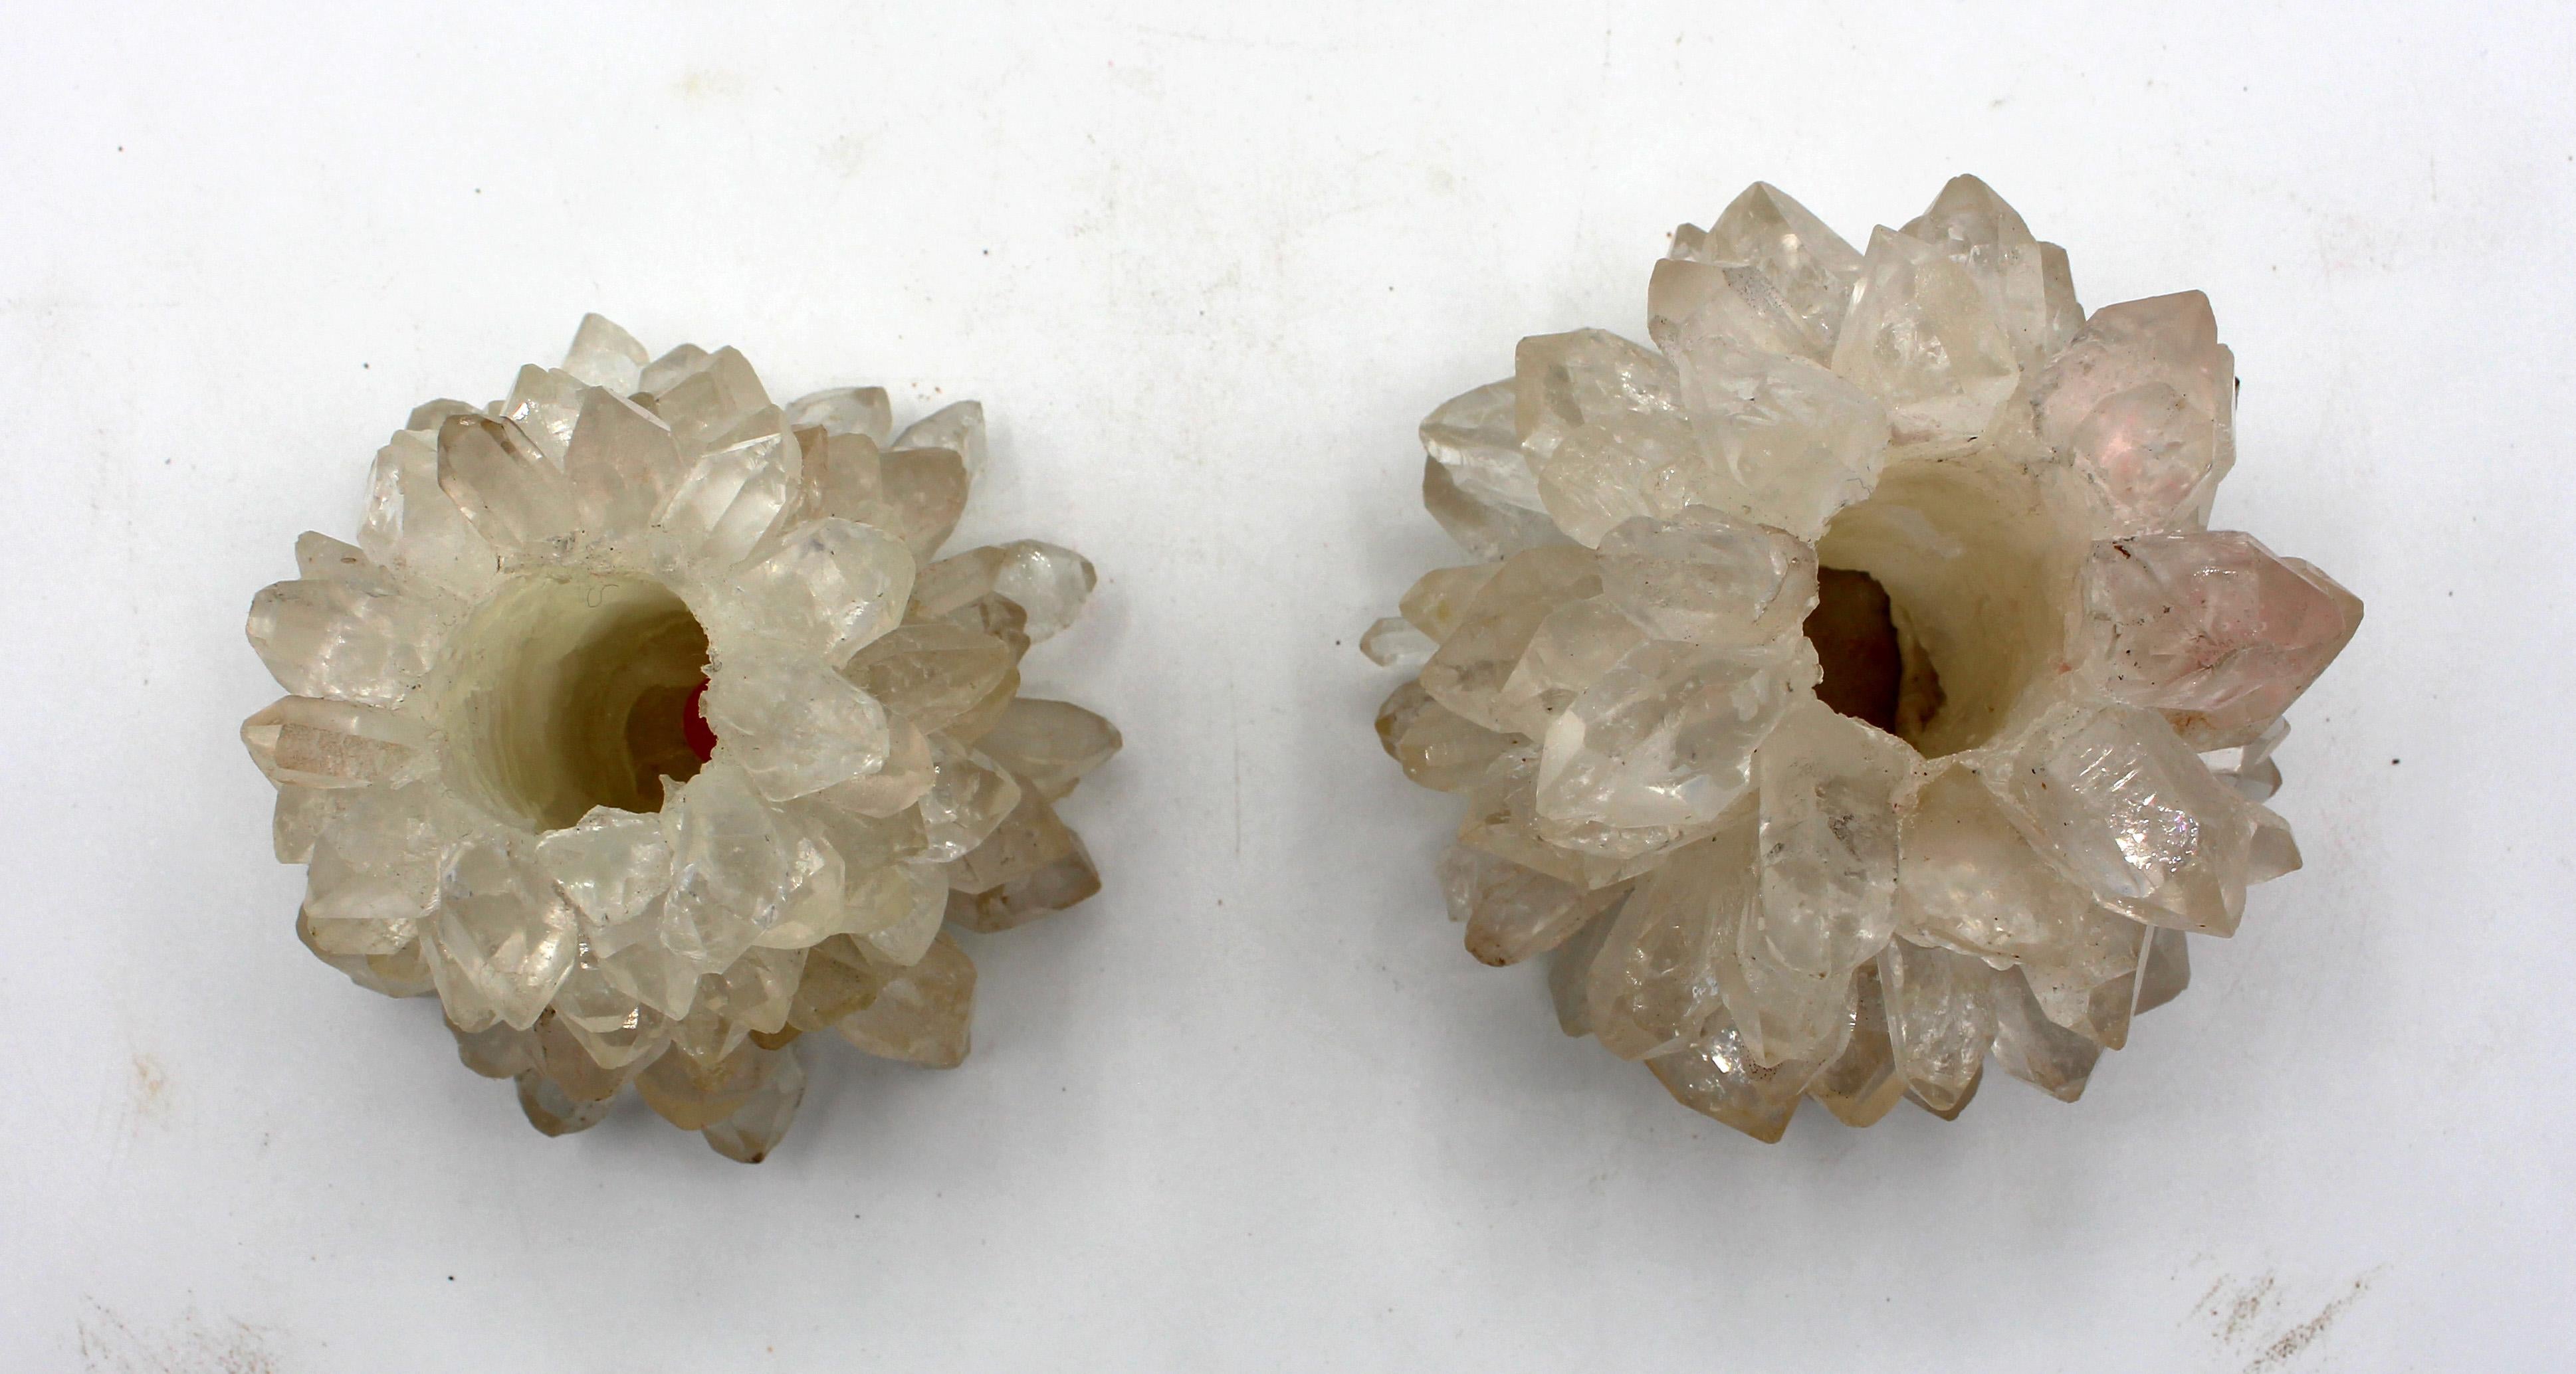 Two Mid-20th century natural rock crystal candleholders, Brazilian. Some expected minor losses to spike tips. One more conical than the other.
Each 3.75